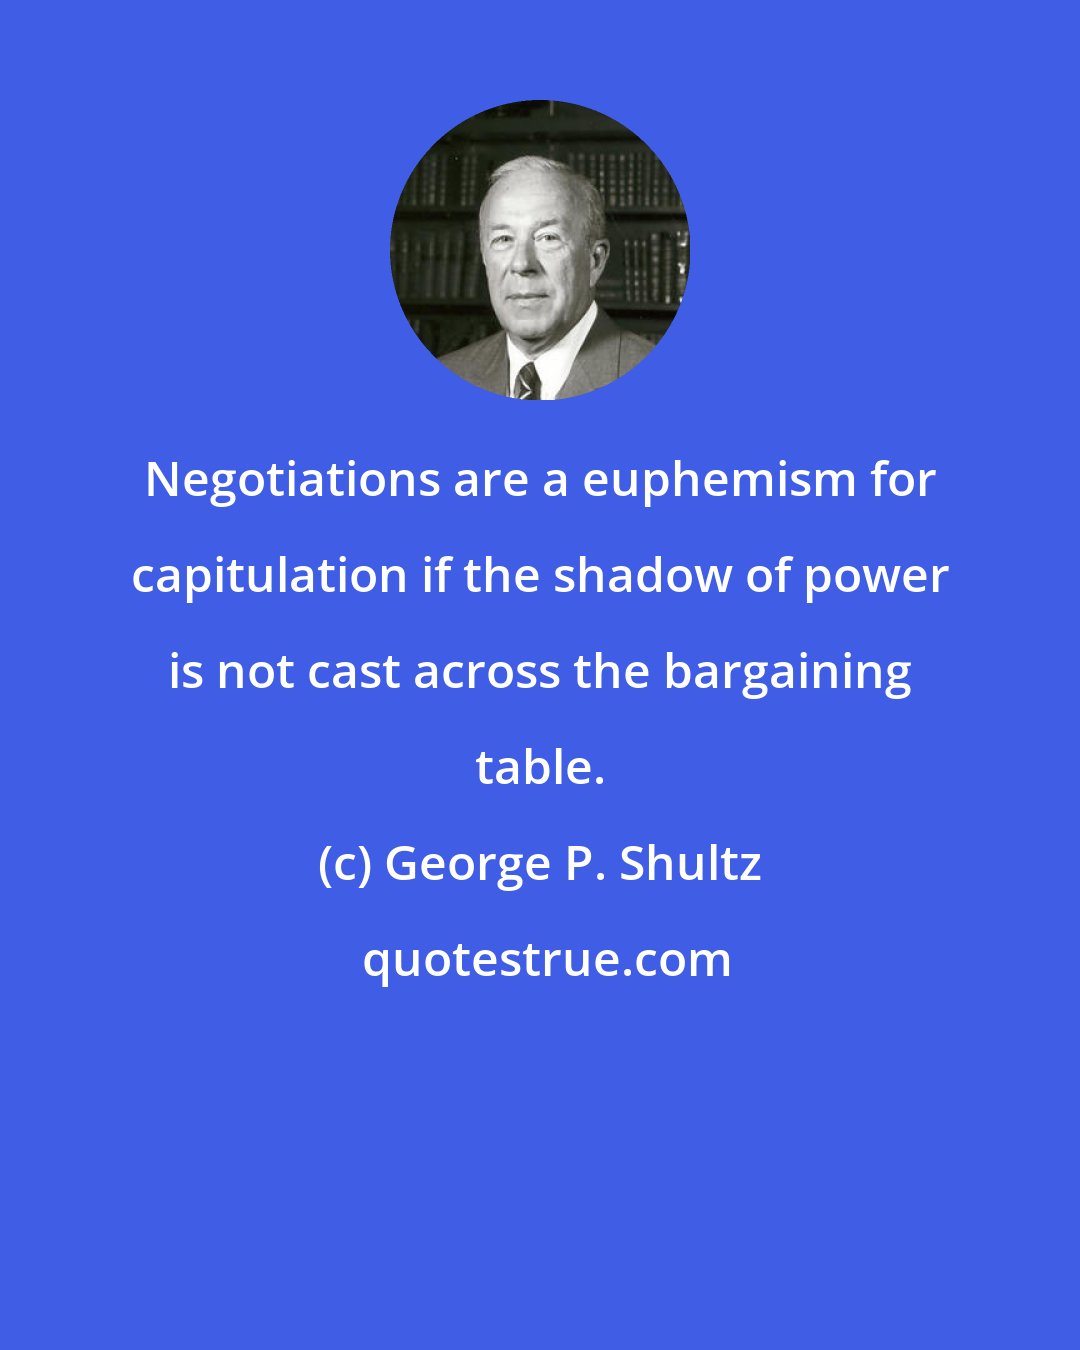 George P. Shultz: Negotiations are a euphemism for capitulation if the shadow of power is not cast across the bargaining table.